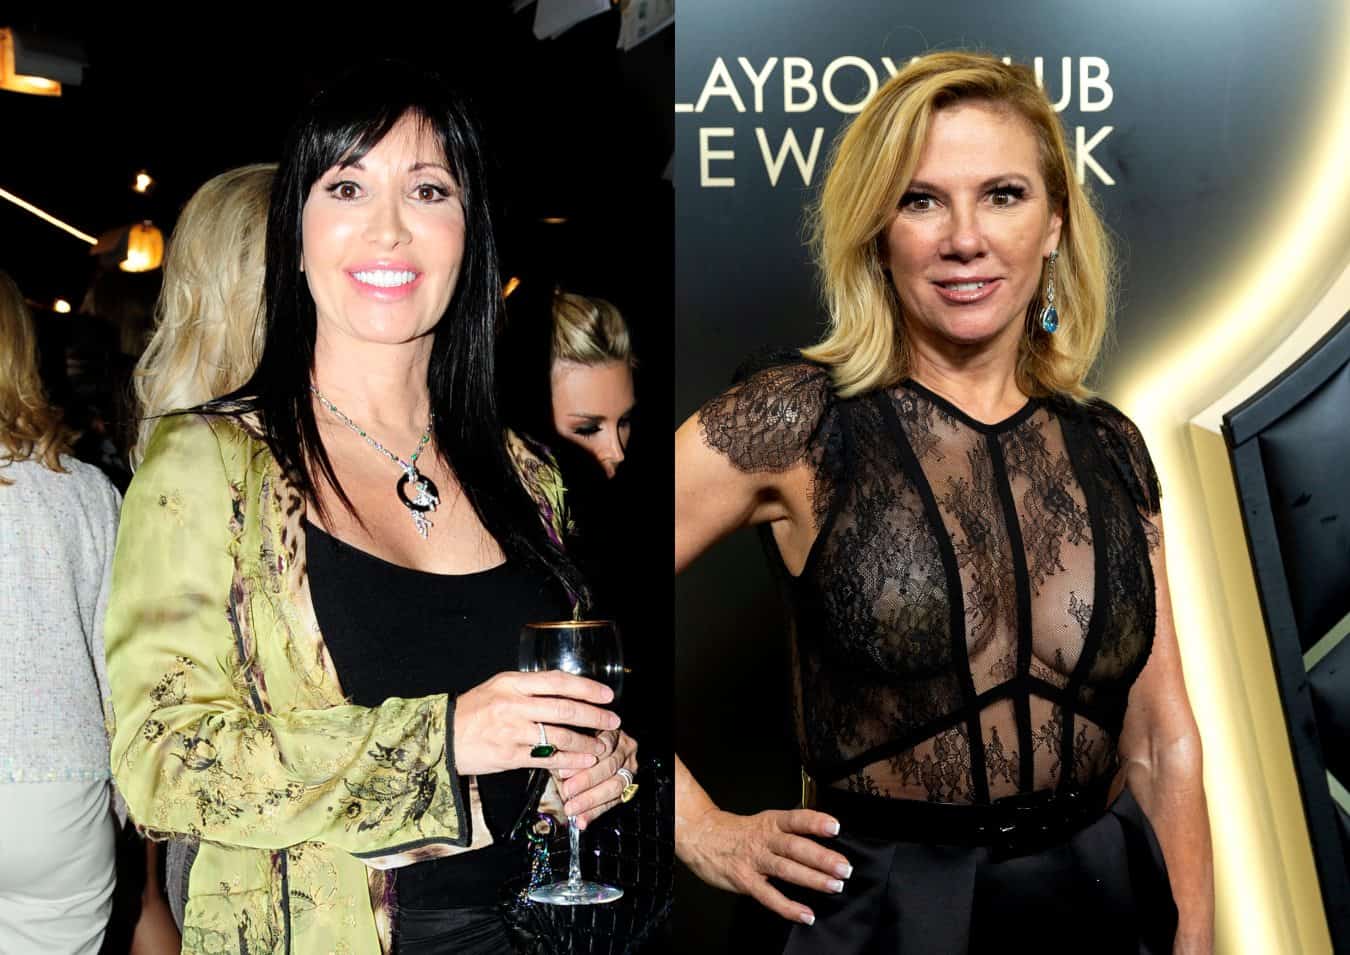 Elyse Slaine Confirms She Will Not Be Appearing on the RHONY Reunion and Twitter Isn't Happy About It, Plus Says Her Drama With Ramona Singer is "More Complicated" Than Fans Realize After Ramona is Blamed for Her Absence